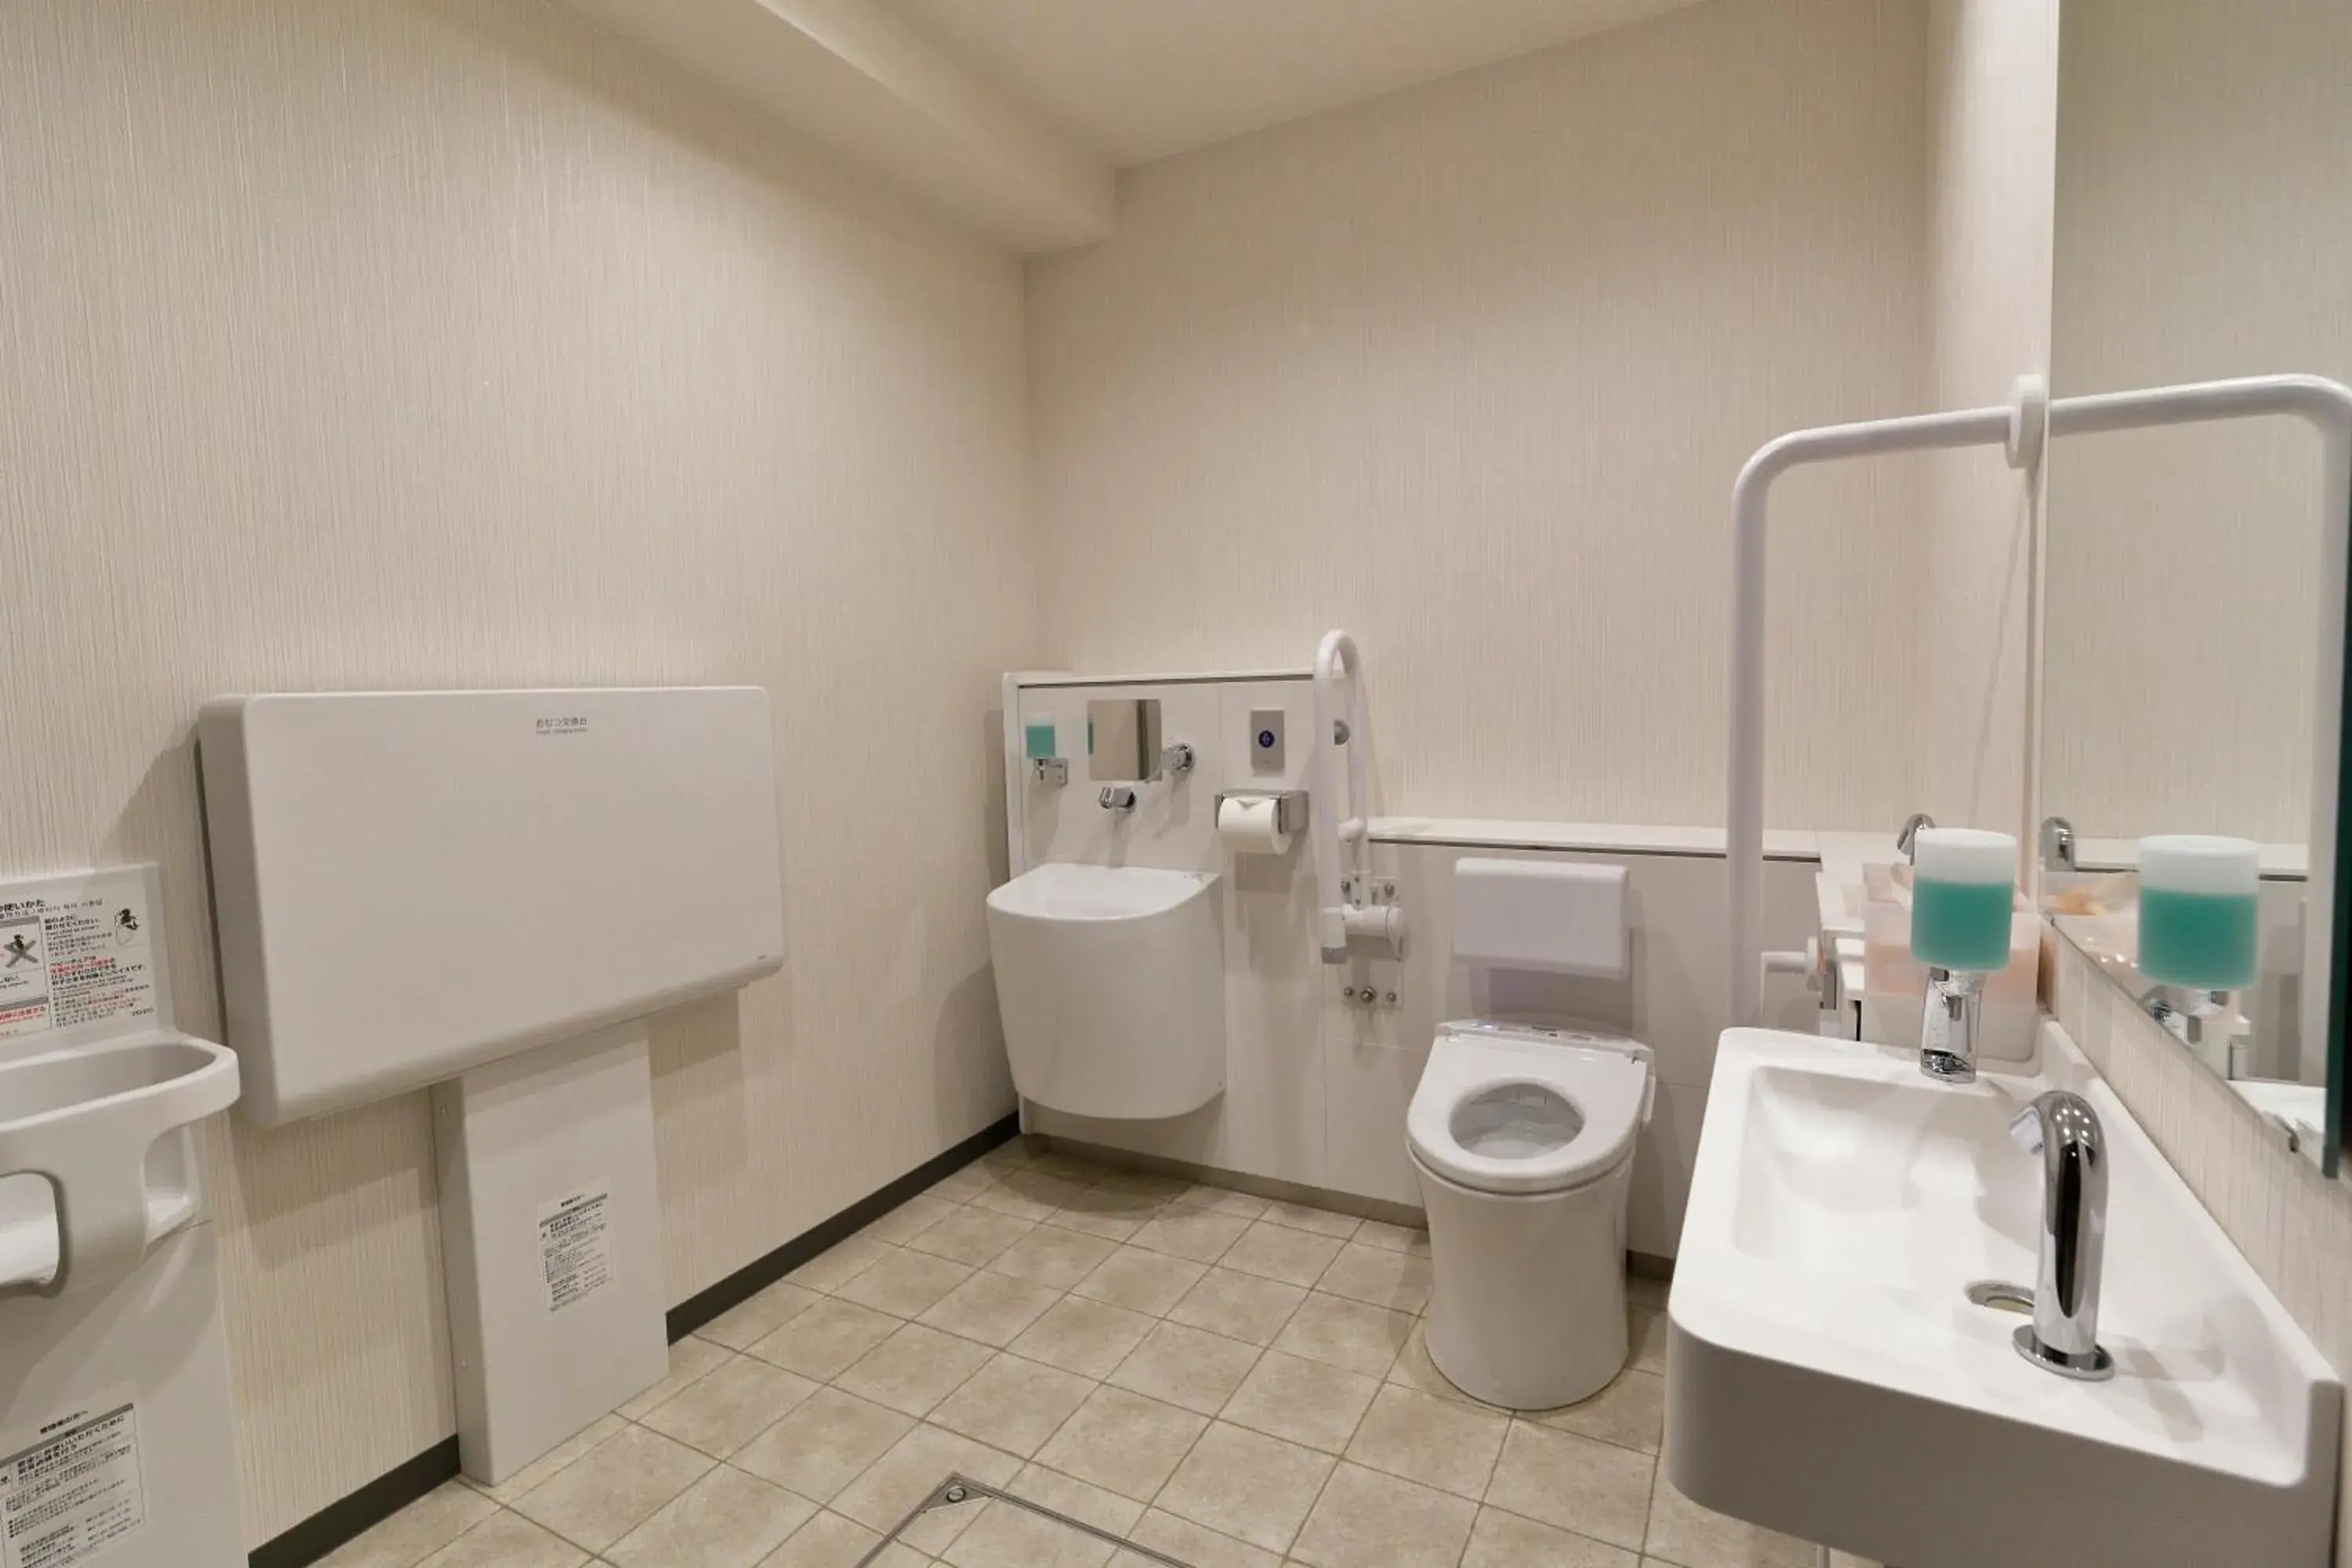 Area and facilities, Bathroom in Act Hotel Roppongi